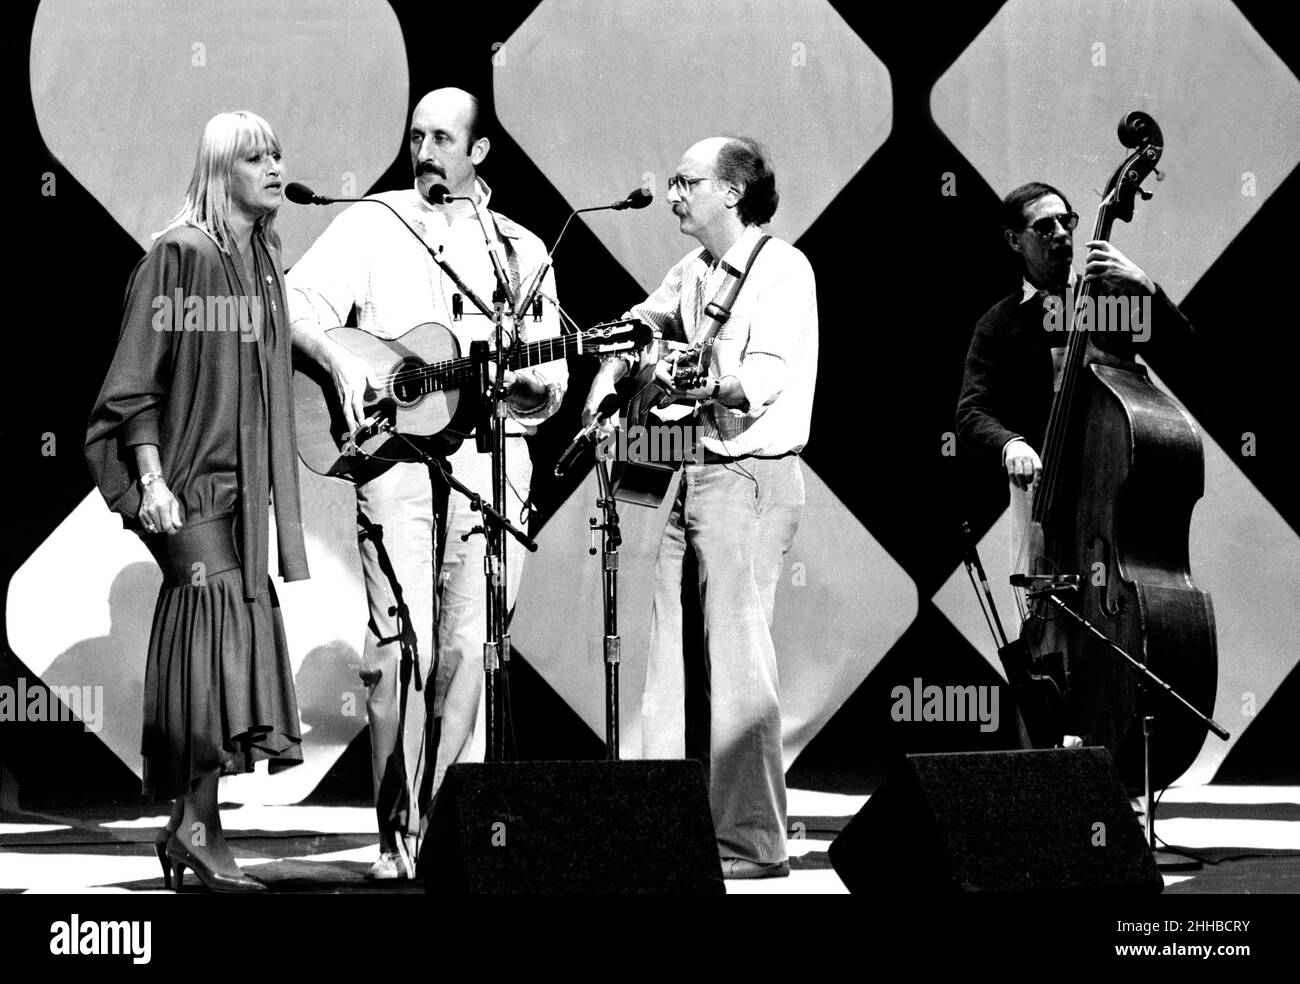 Peter, Paul & Mary (Mary Travers, Paul Stookey e Peter Yarrow) in esecuzione sul programma televisivo 'Solid Gold,' fine 1970s credito: Ron Wolfson / Rock negatives / MediaPunch Foto Stock